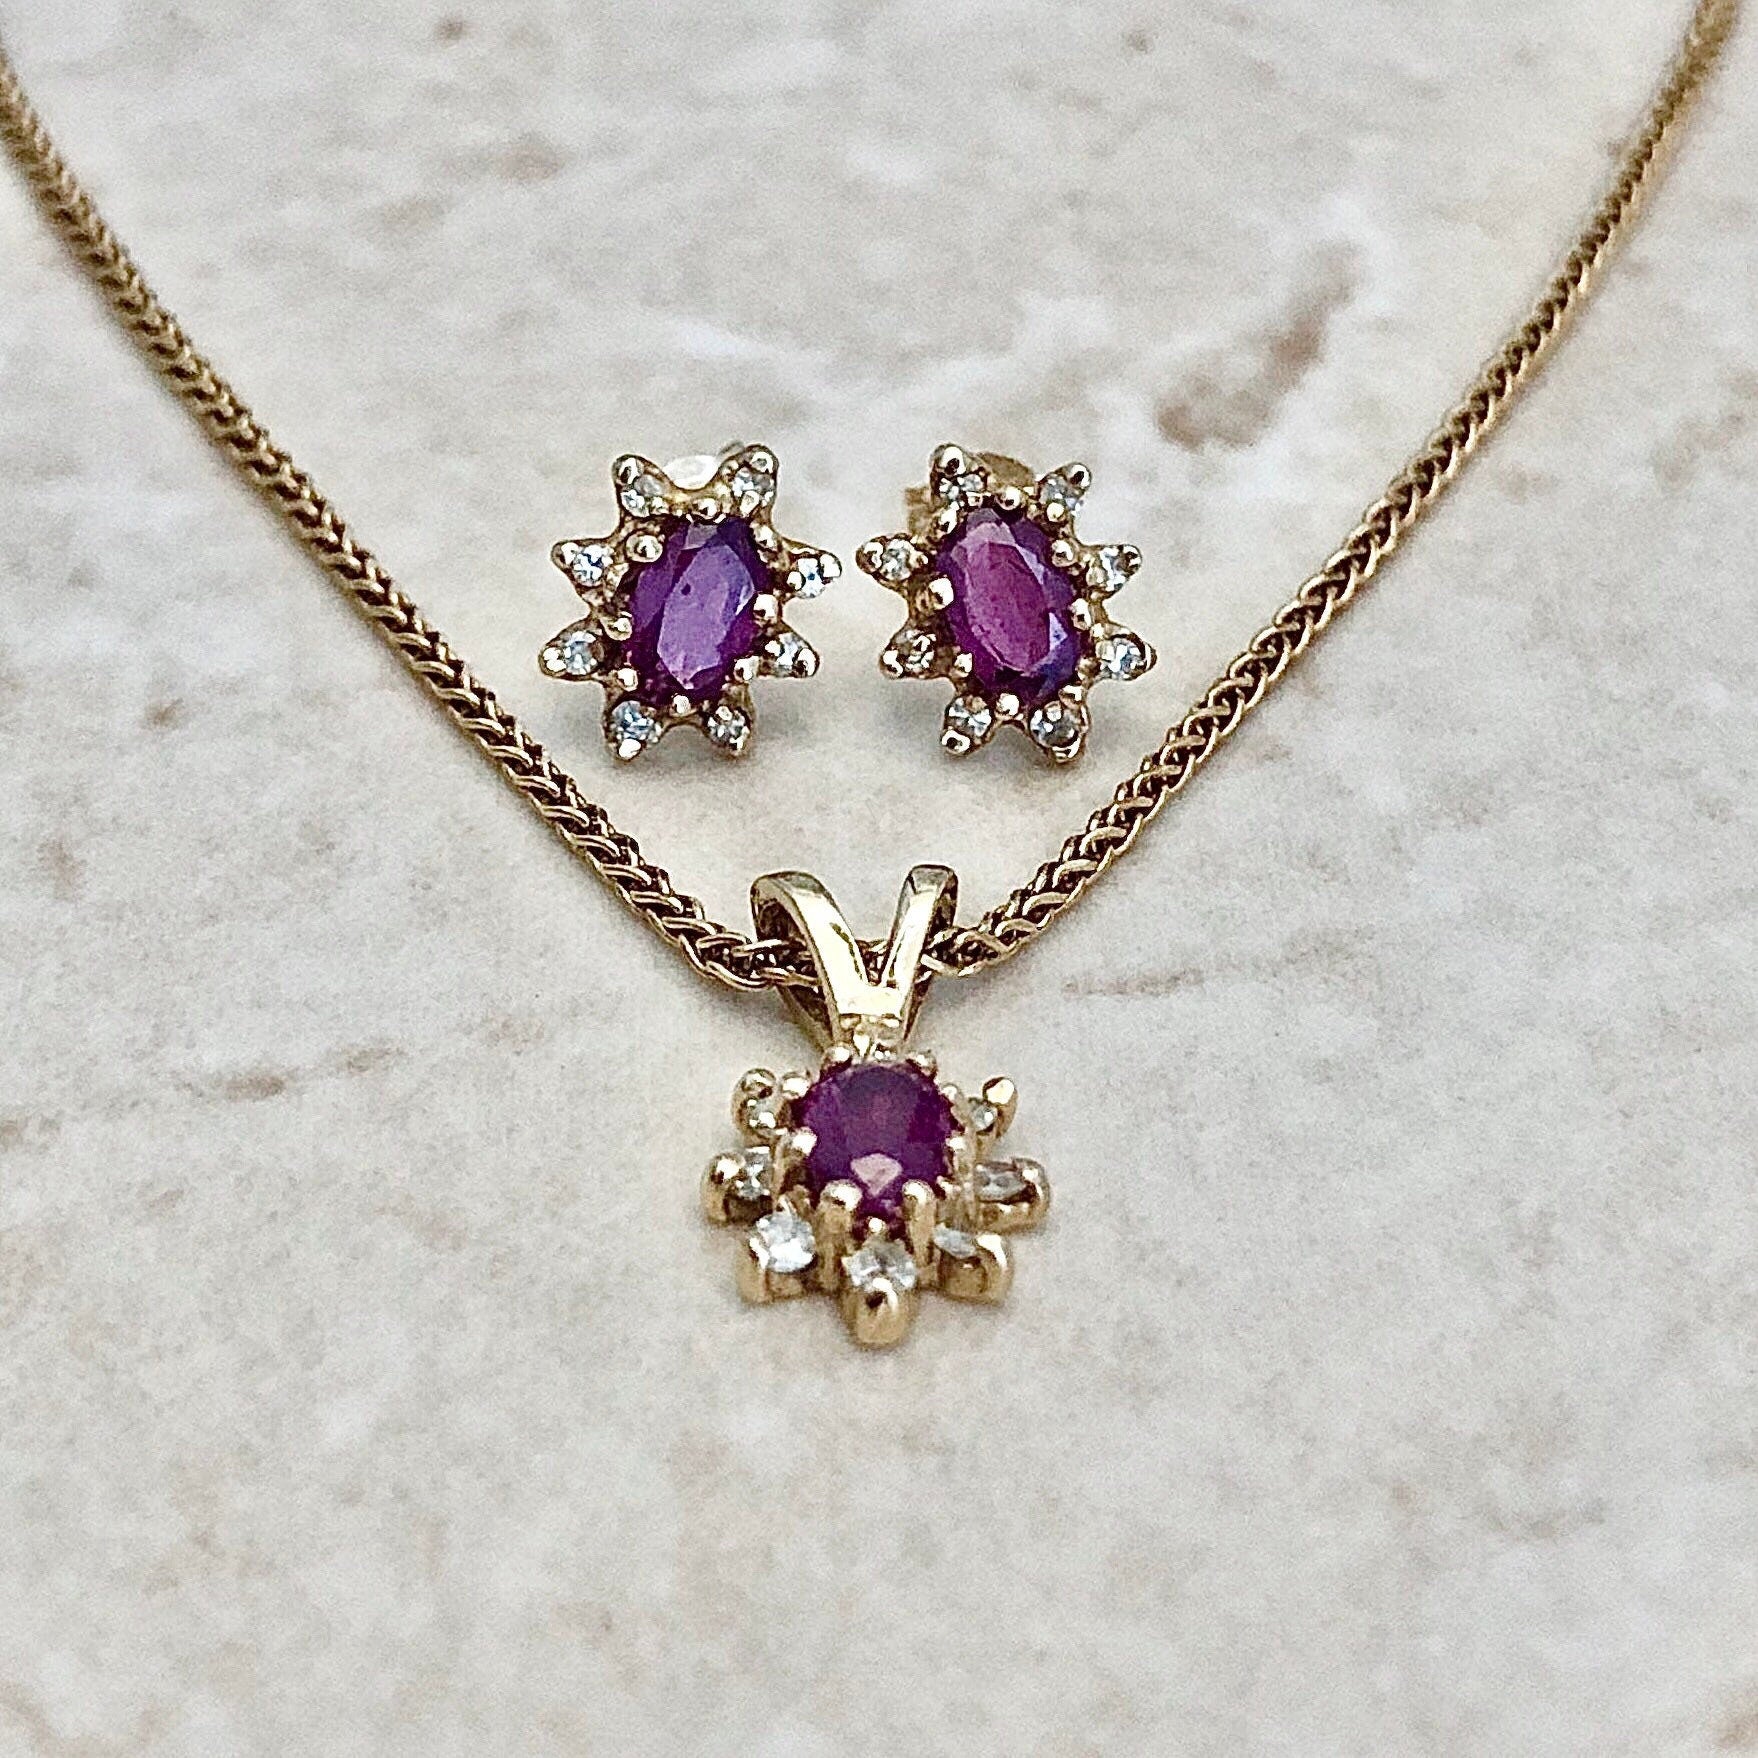 Vintage Natural Ruby & Diamond Halo Pendant And Earrings Set - 14 Karat Yellow Gold - July Birthstone - Birthday Gift - Necklace - Studs